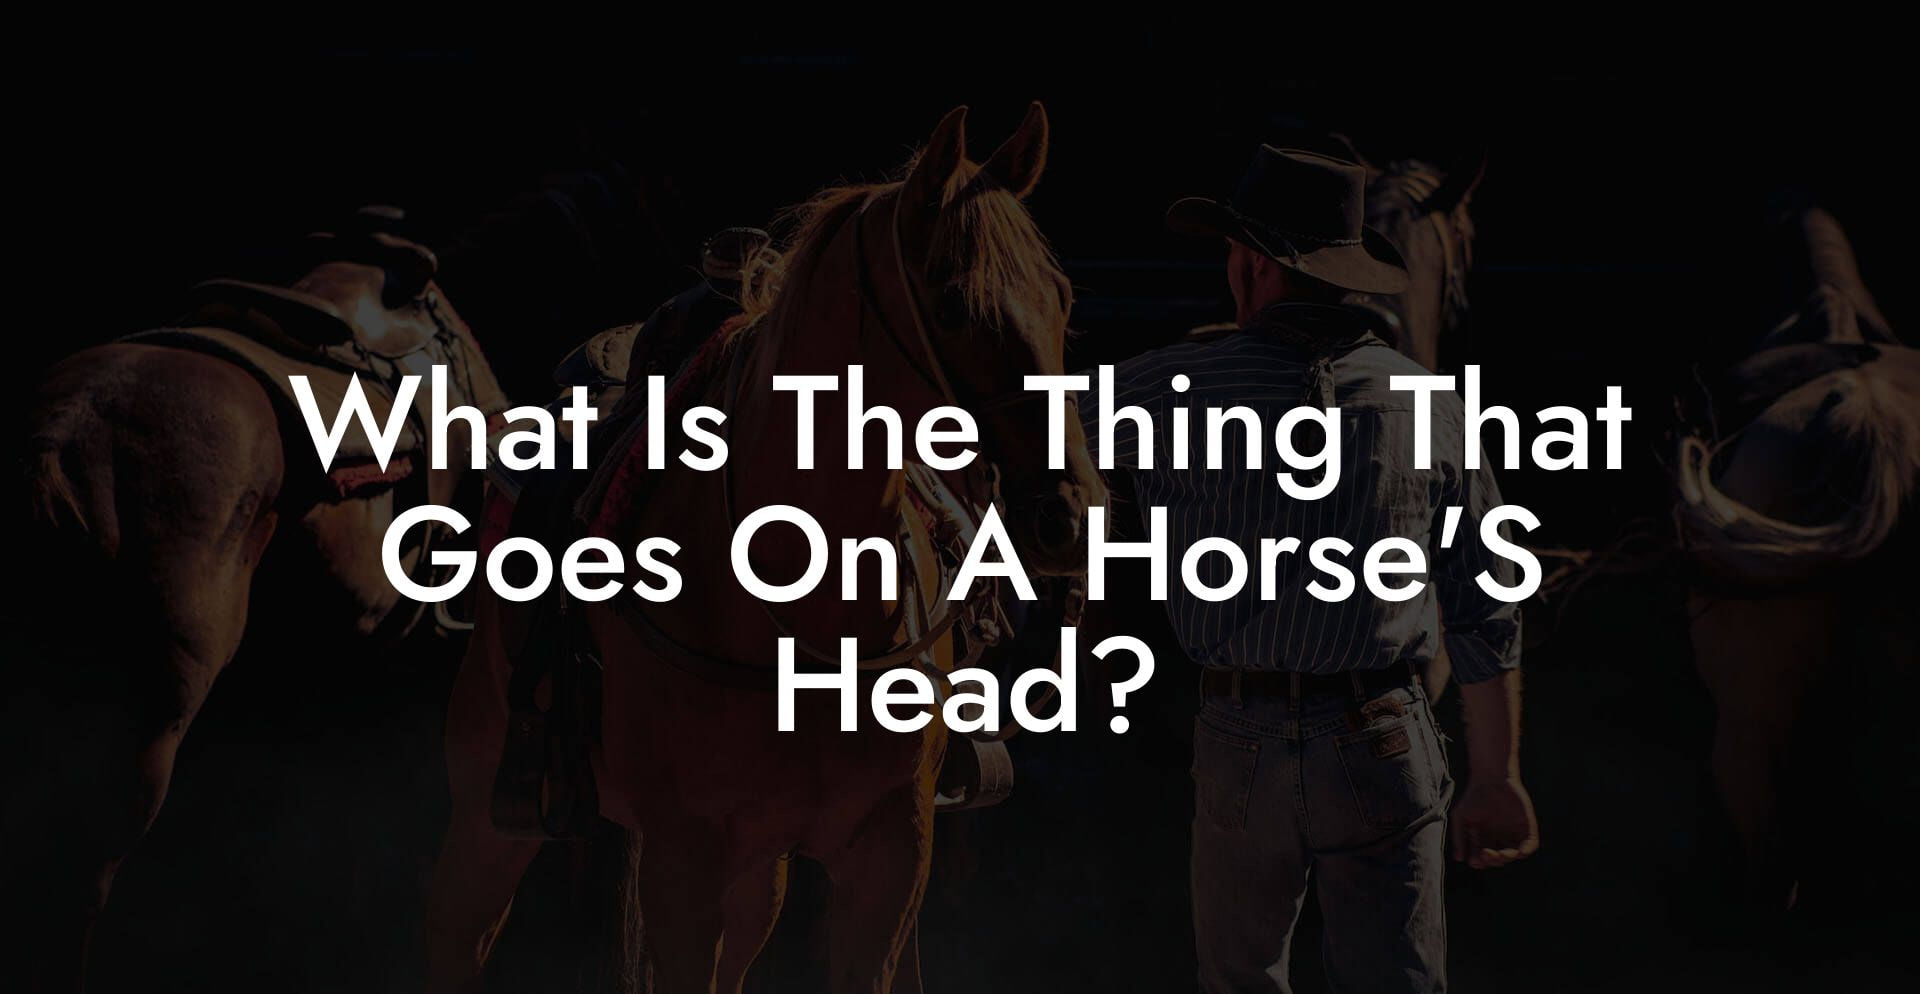 What Is The Thing That Goes On A Horse'S Head?